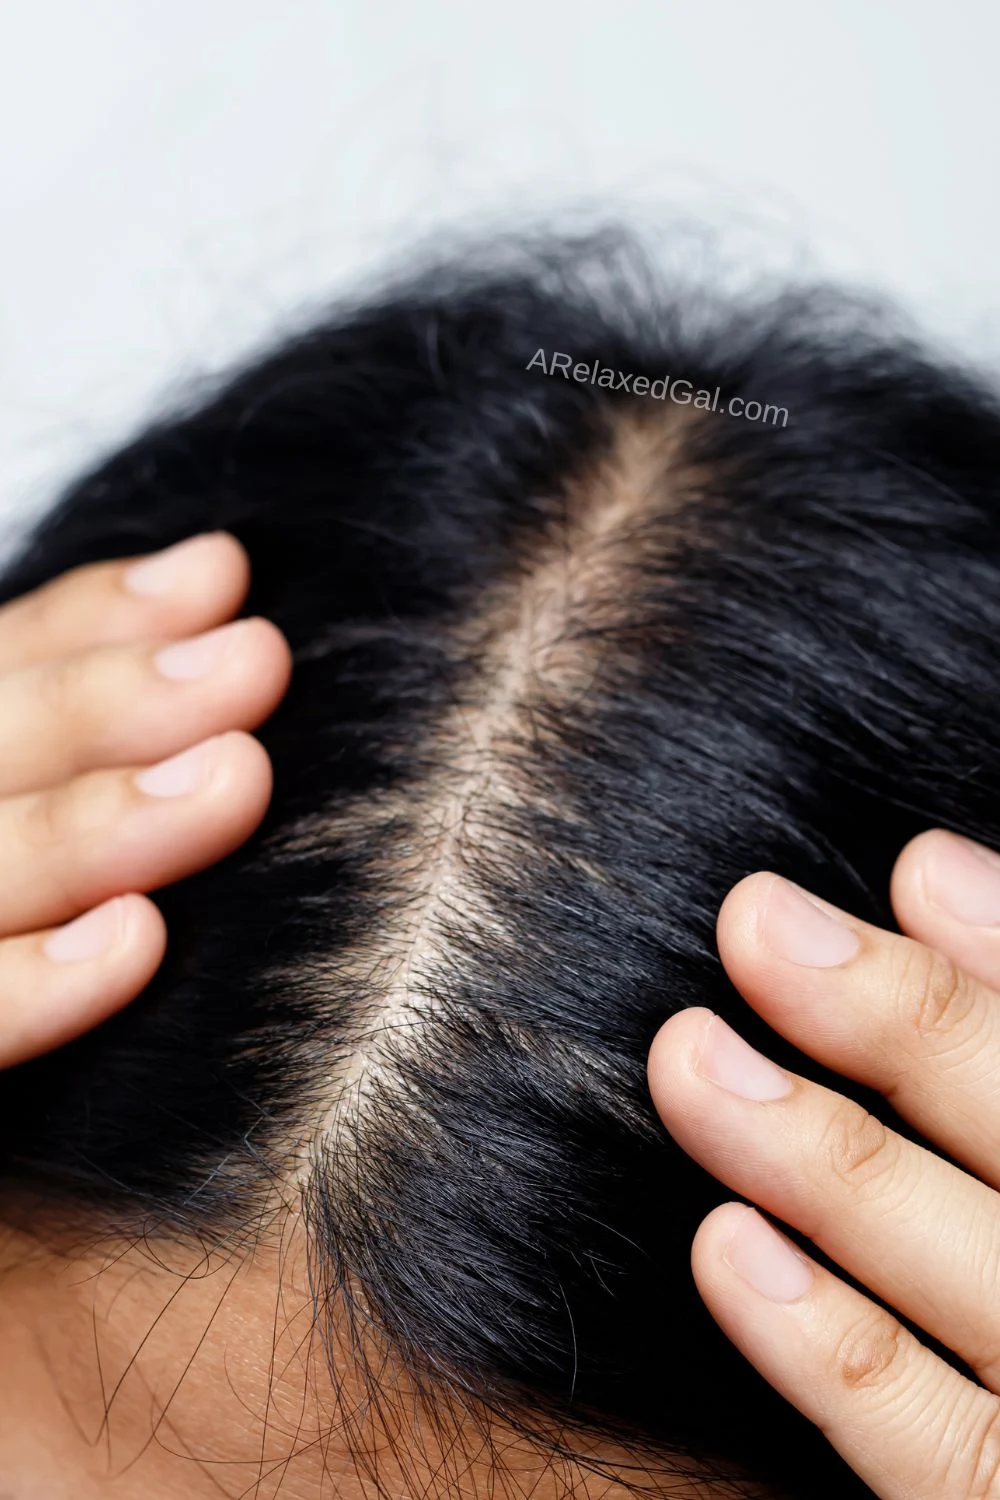 woman with hair parted showing her scalp